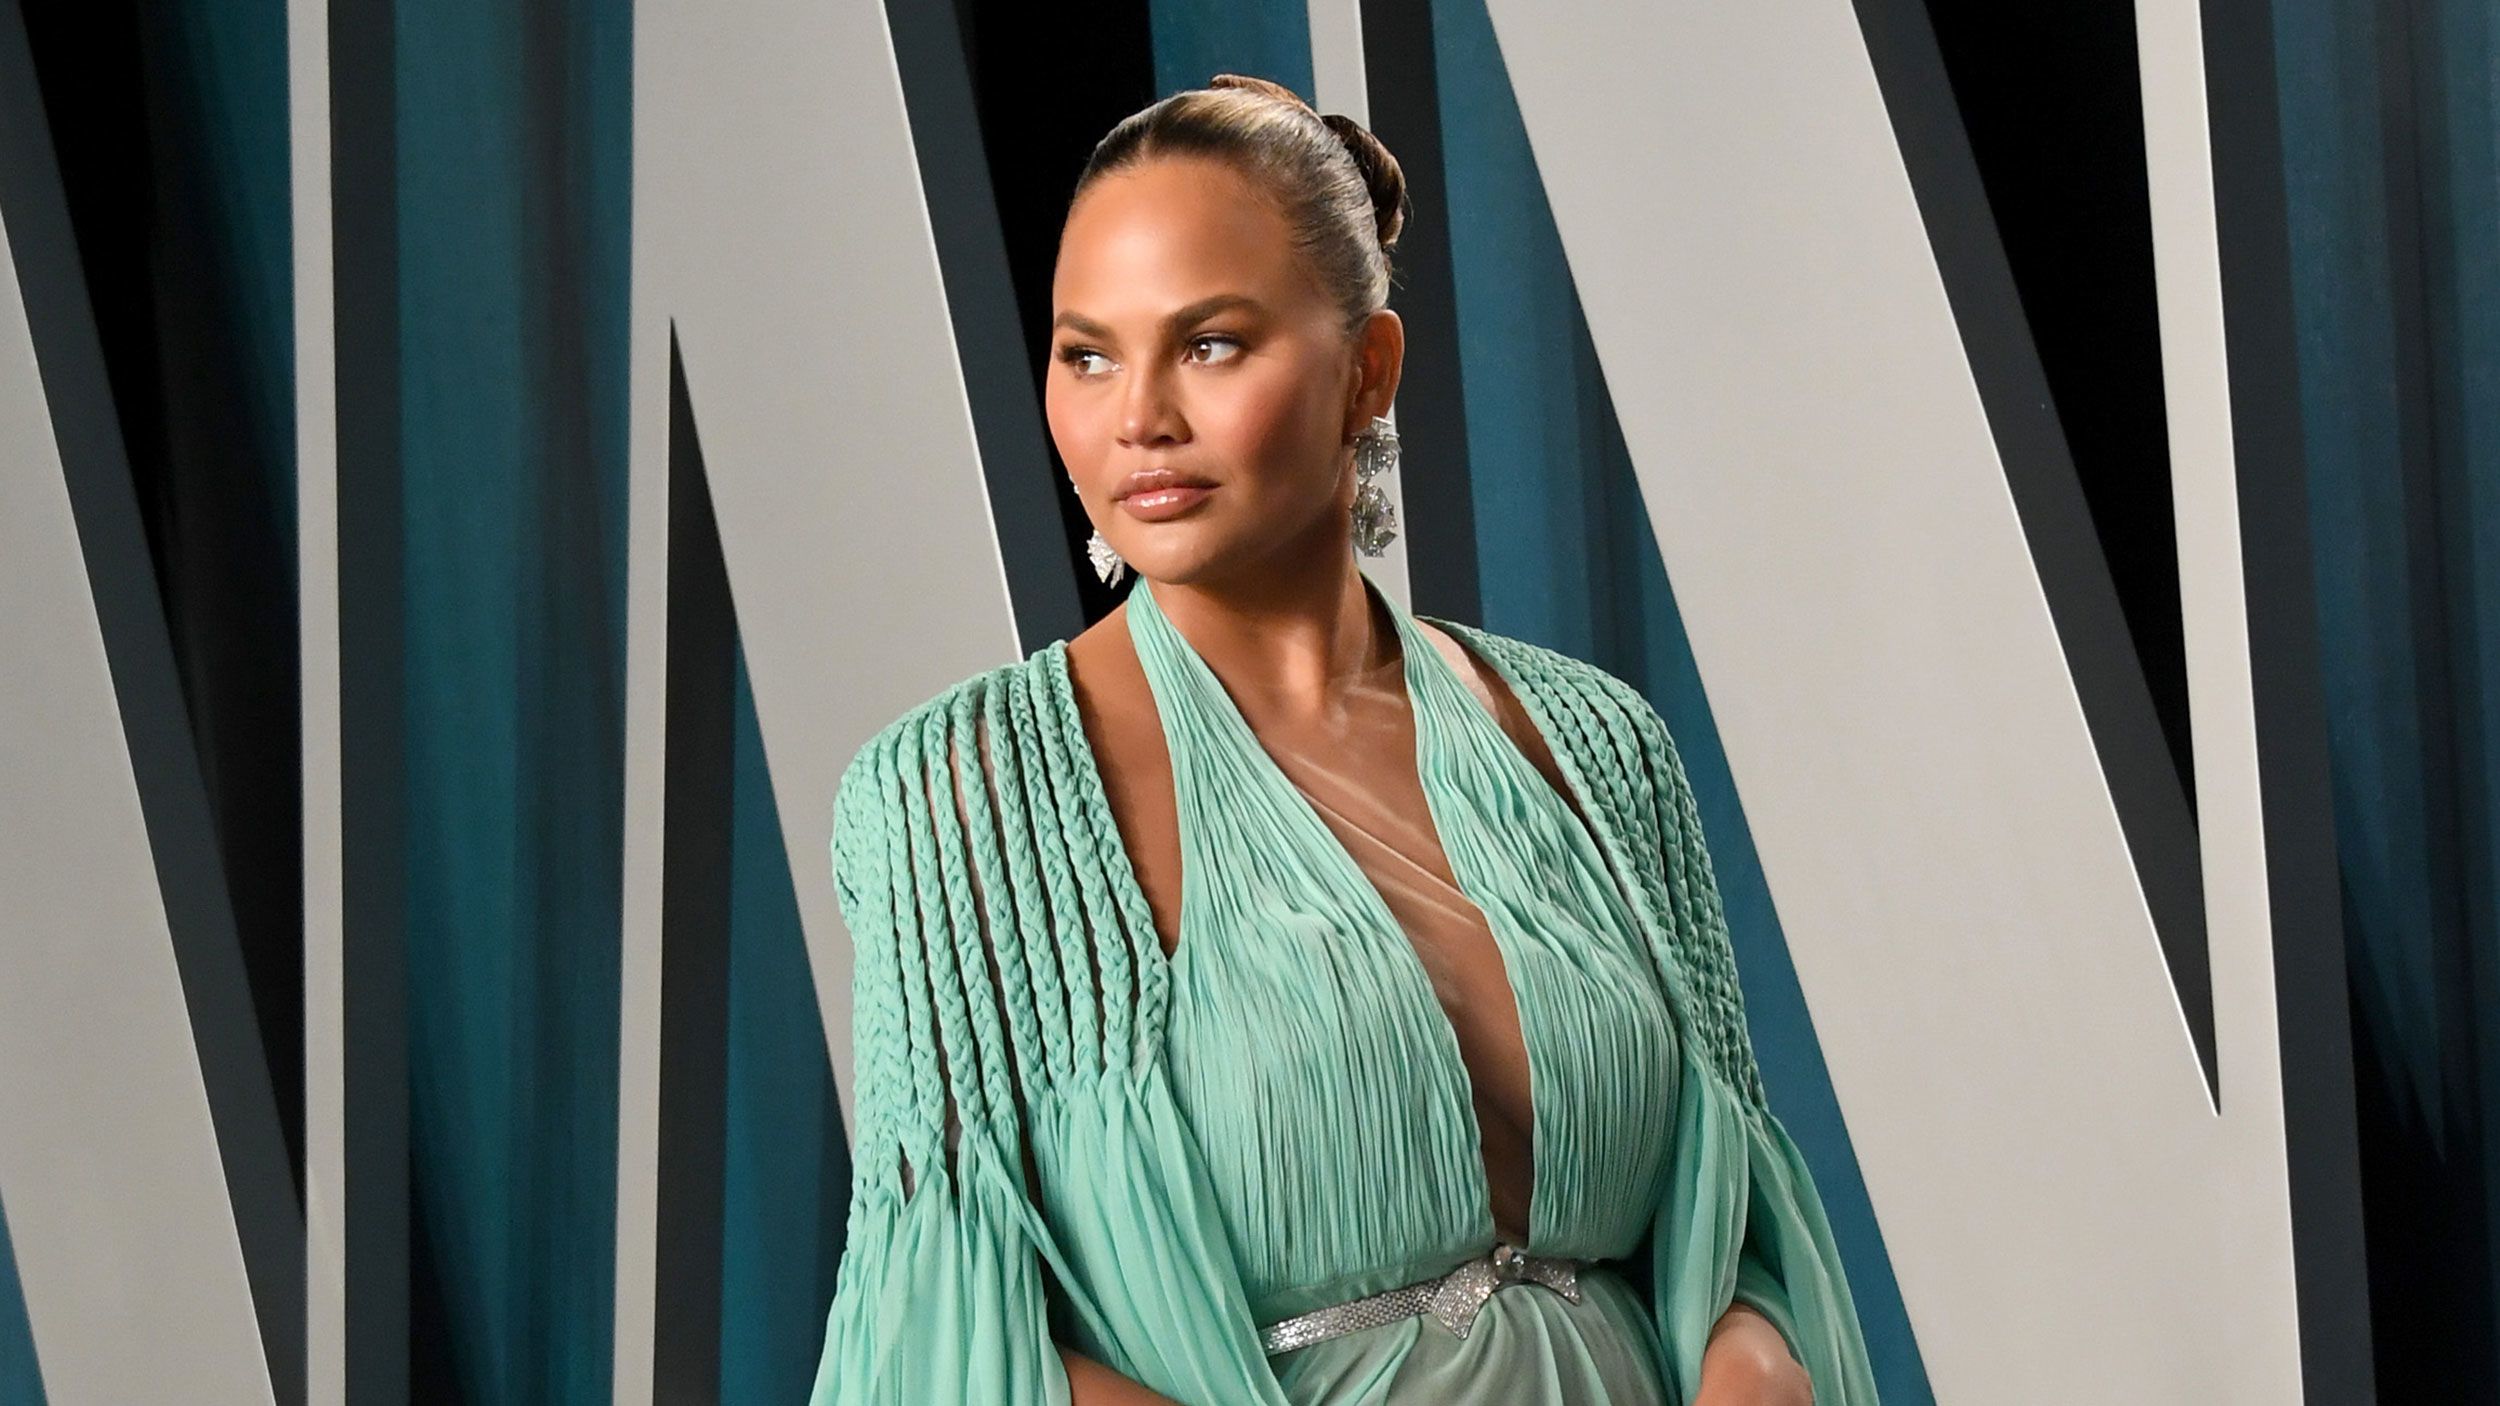 Chrissy Teigen says she's come to understand her miscarriage was actually  an abortion that saved her life